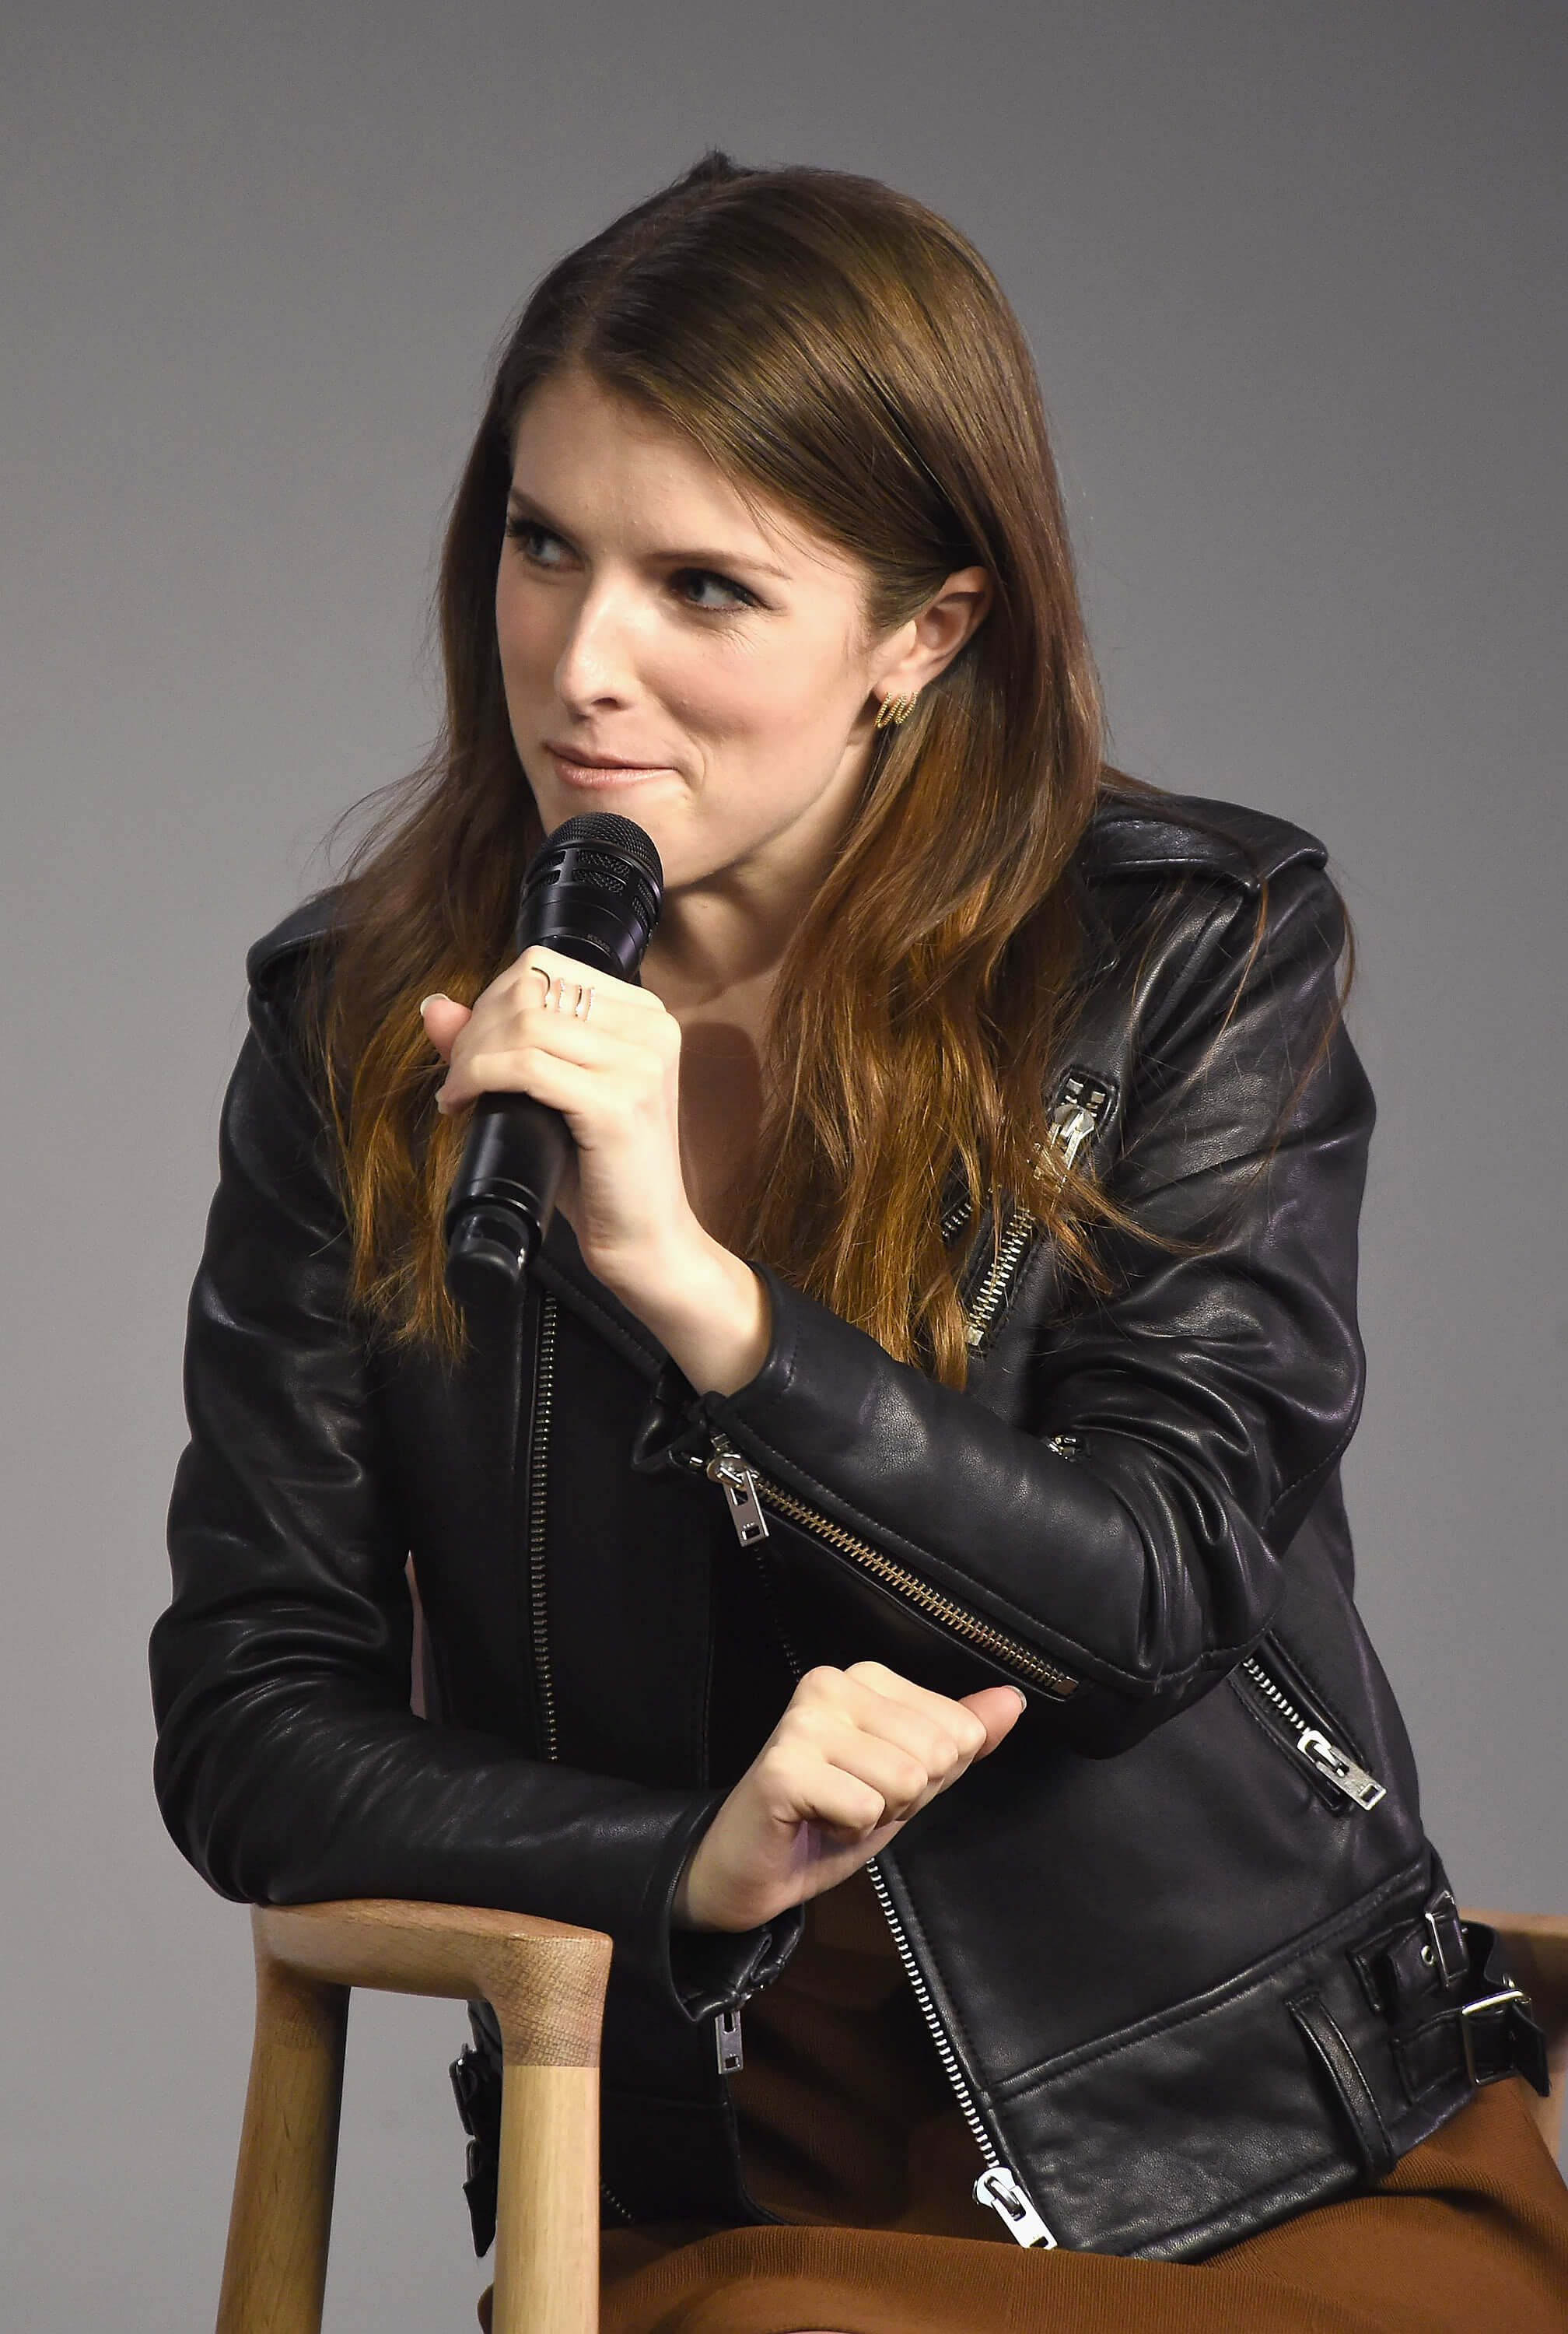 Anna Kendrick promoting Mike & Dave Need Wedding Dates